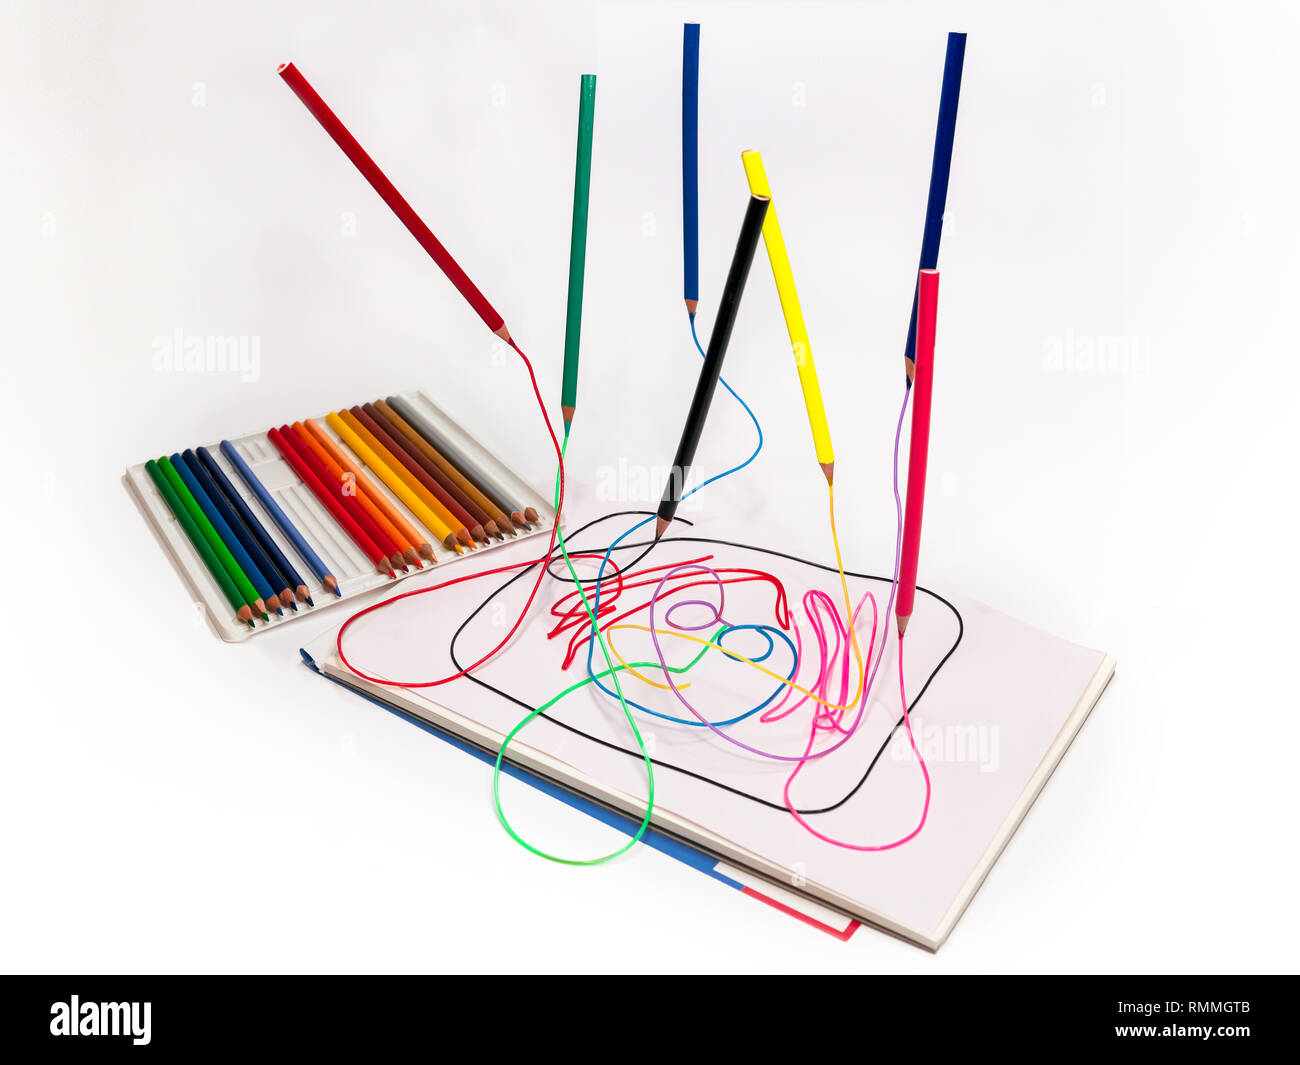 Spiral sketch pad and color pencils template image. Good copy space. Back  to school, homework, hand drawing artist concept Stock Photo - Alamy